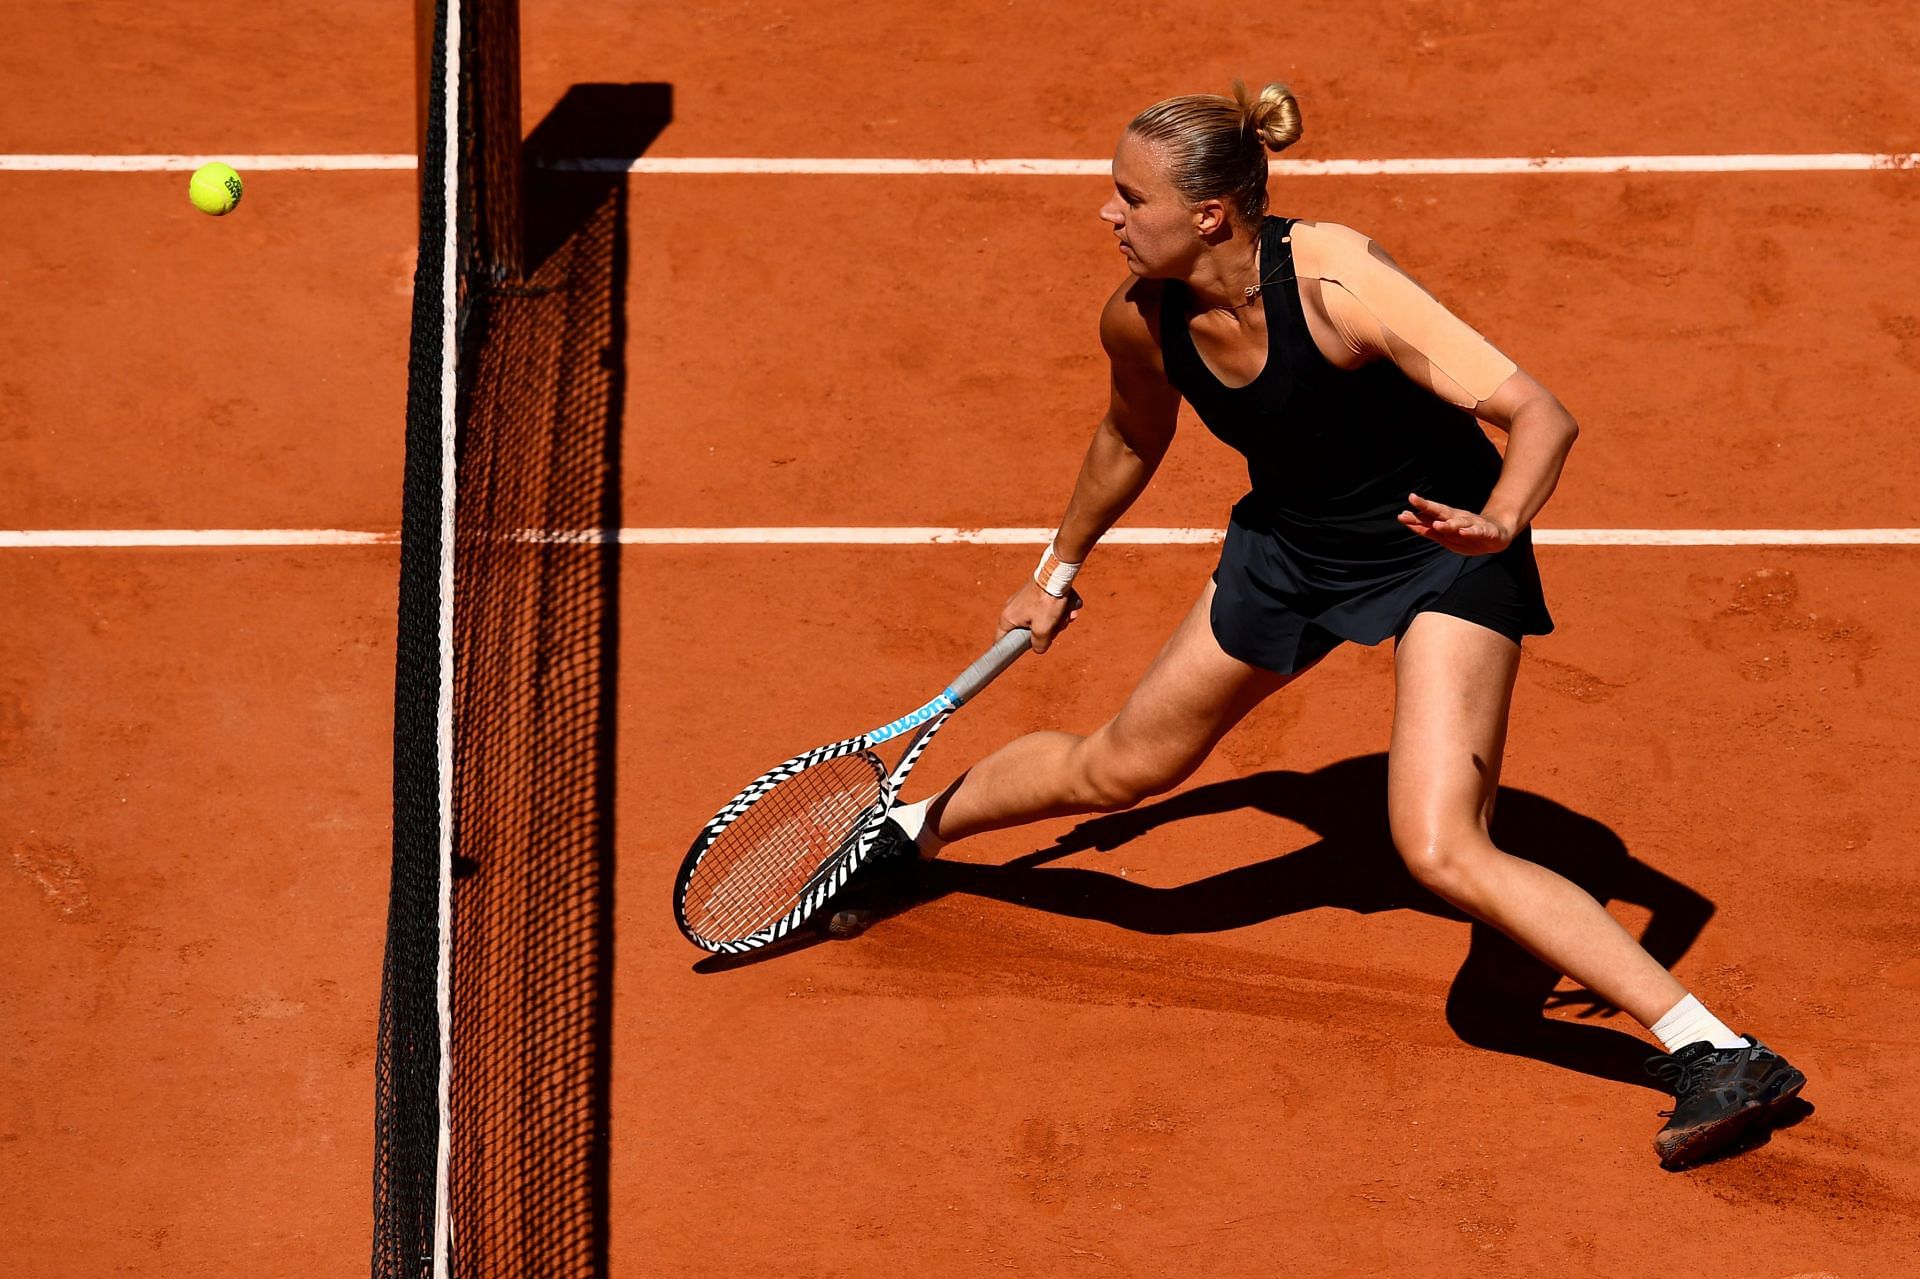 Kanepi recently reached the semifinals of a Roland Garros warm-up event.